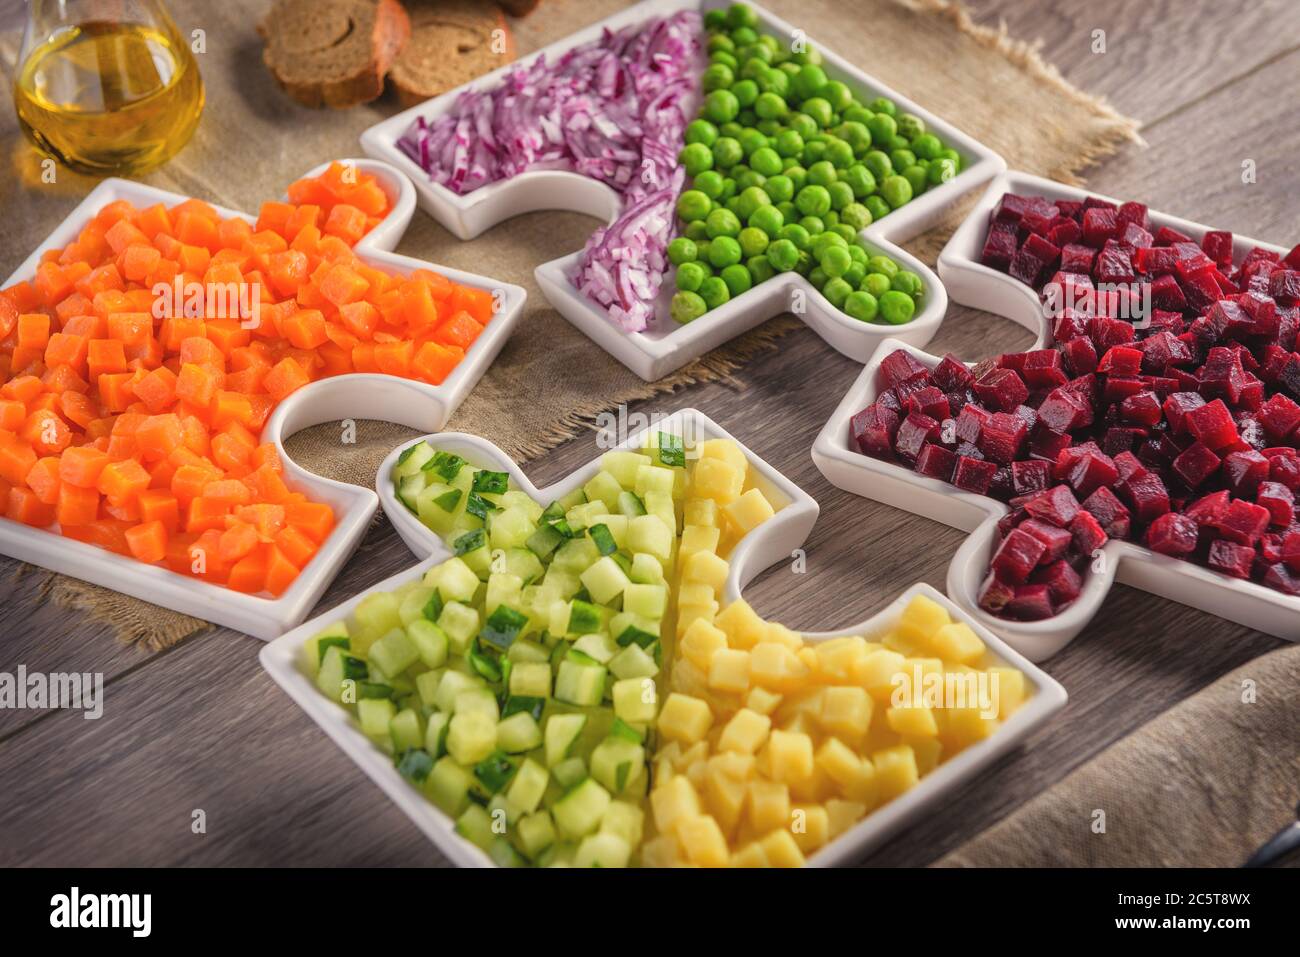 Raw vegetables carrots, peas, onions, cucumber, potatoes, beets cut into cubes lie on plates that are collected in puzzles. Stock Photo